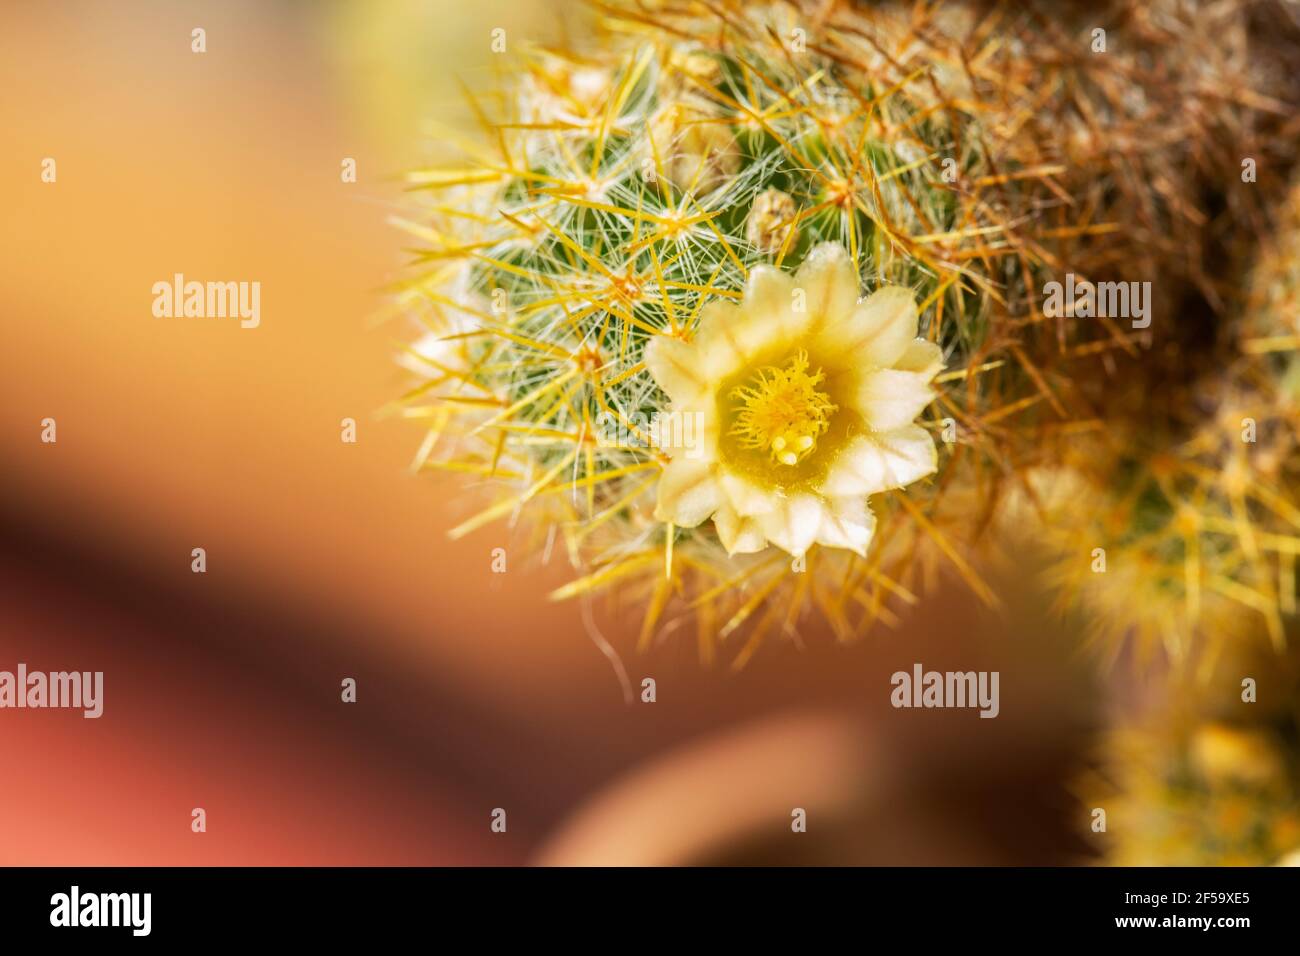 flowering urchin cactus in a pot. Stock Photo